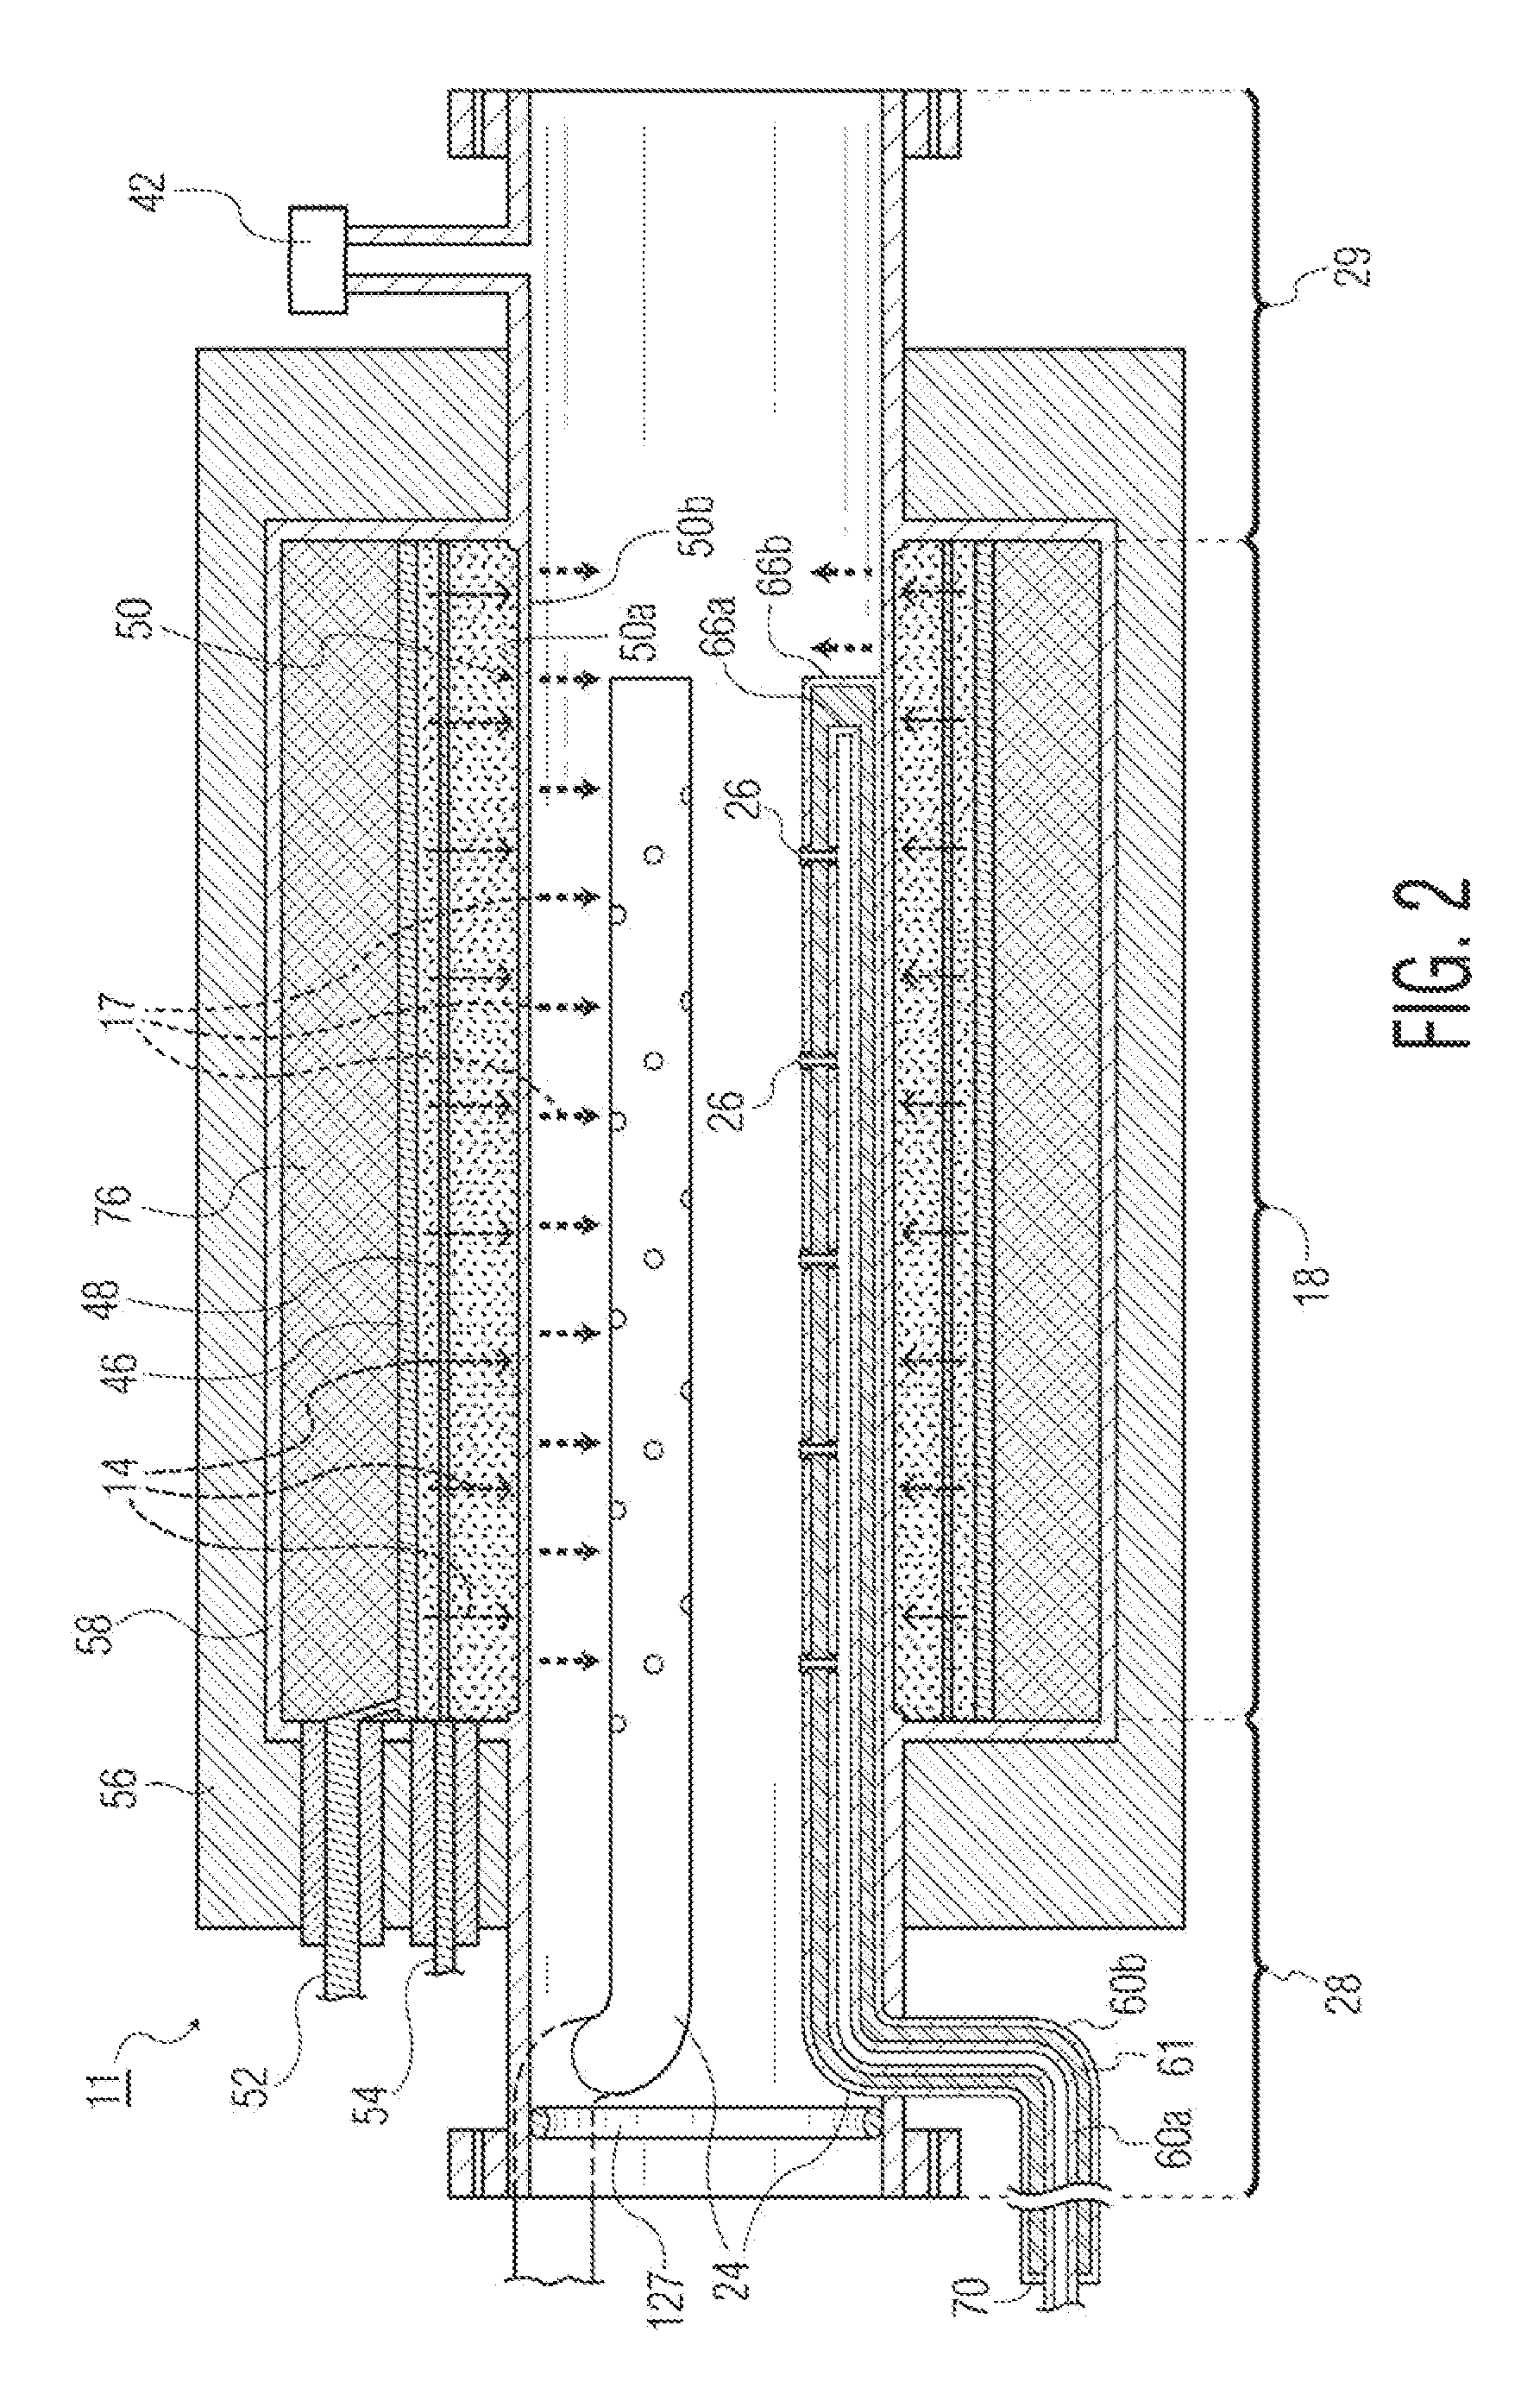 Method and apparatus for inducing chemical reactions by X-ray irradiation